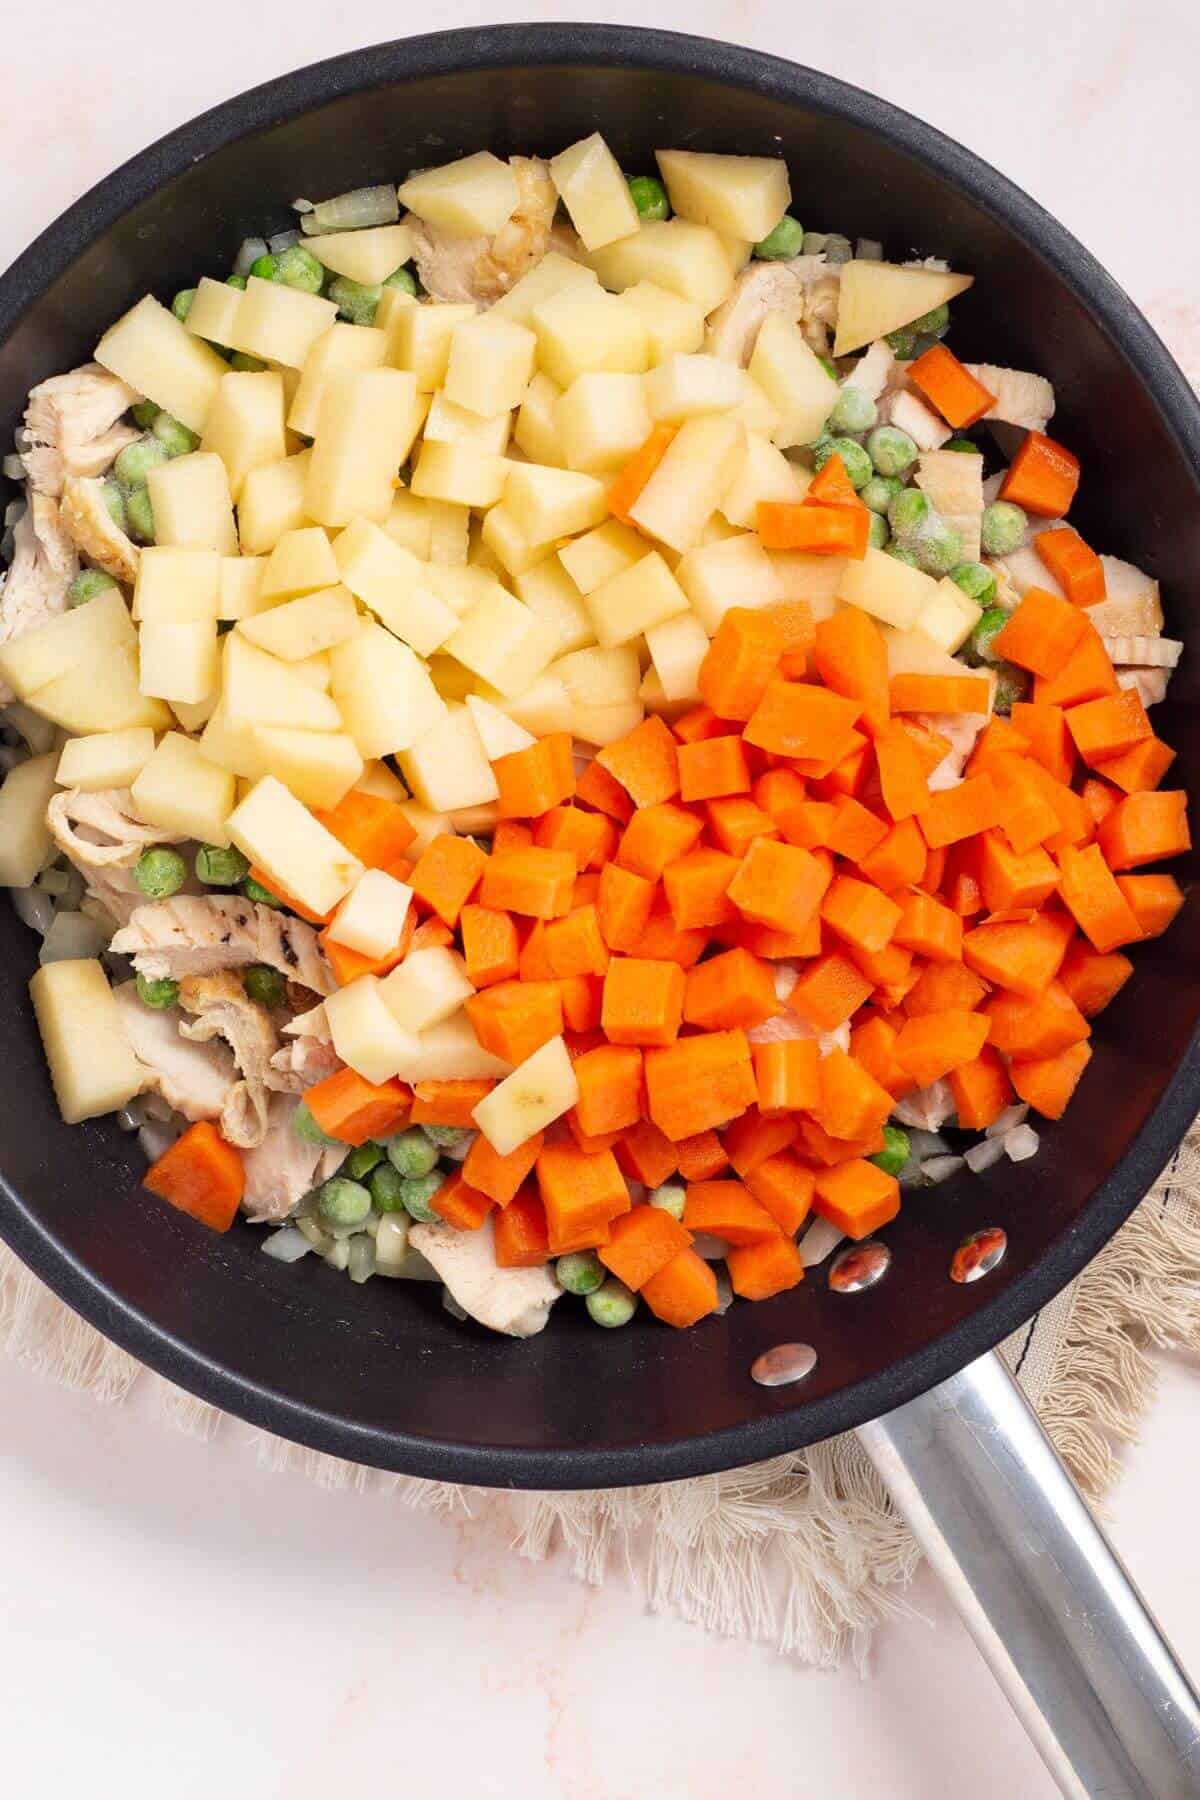 Chicken, peas, carrots, and potatoes added to skillet.